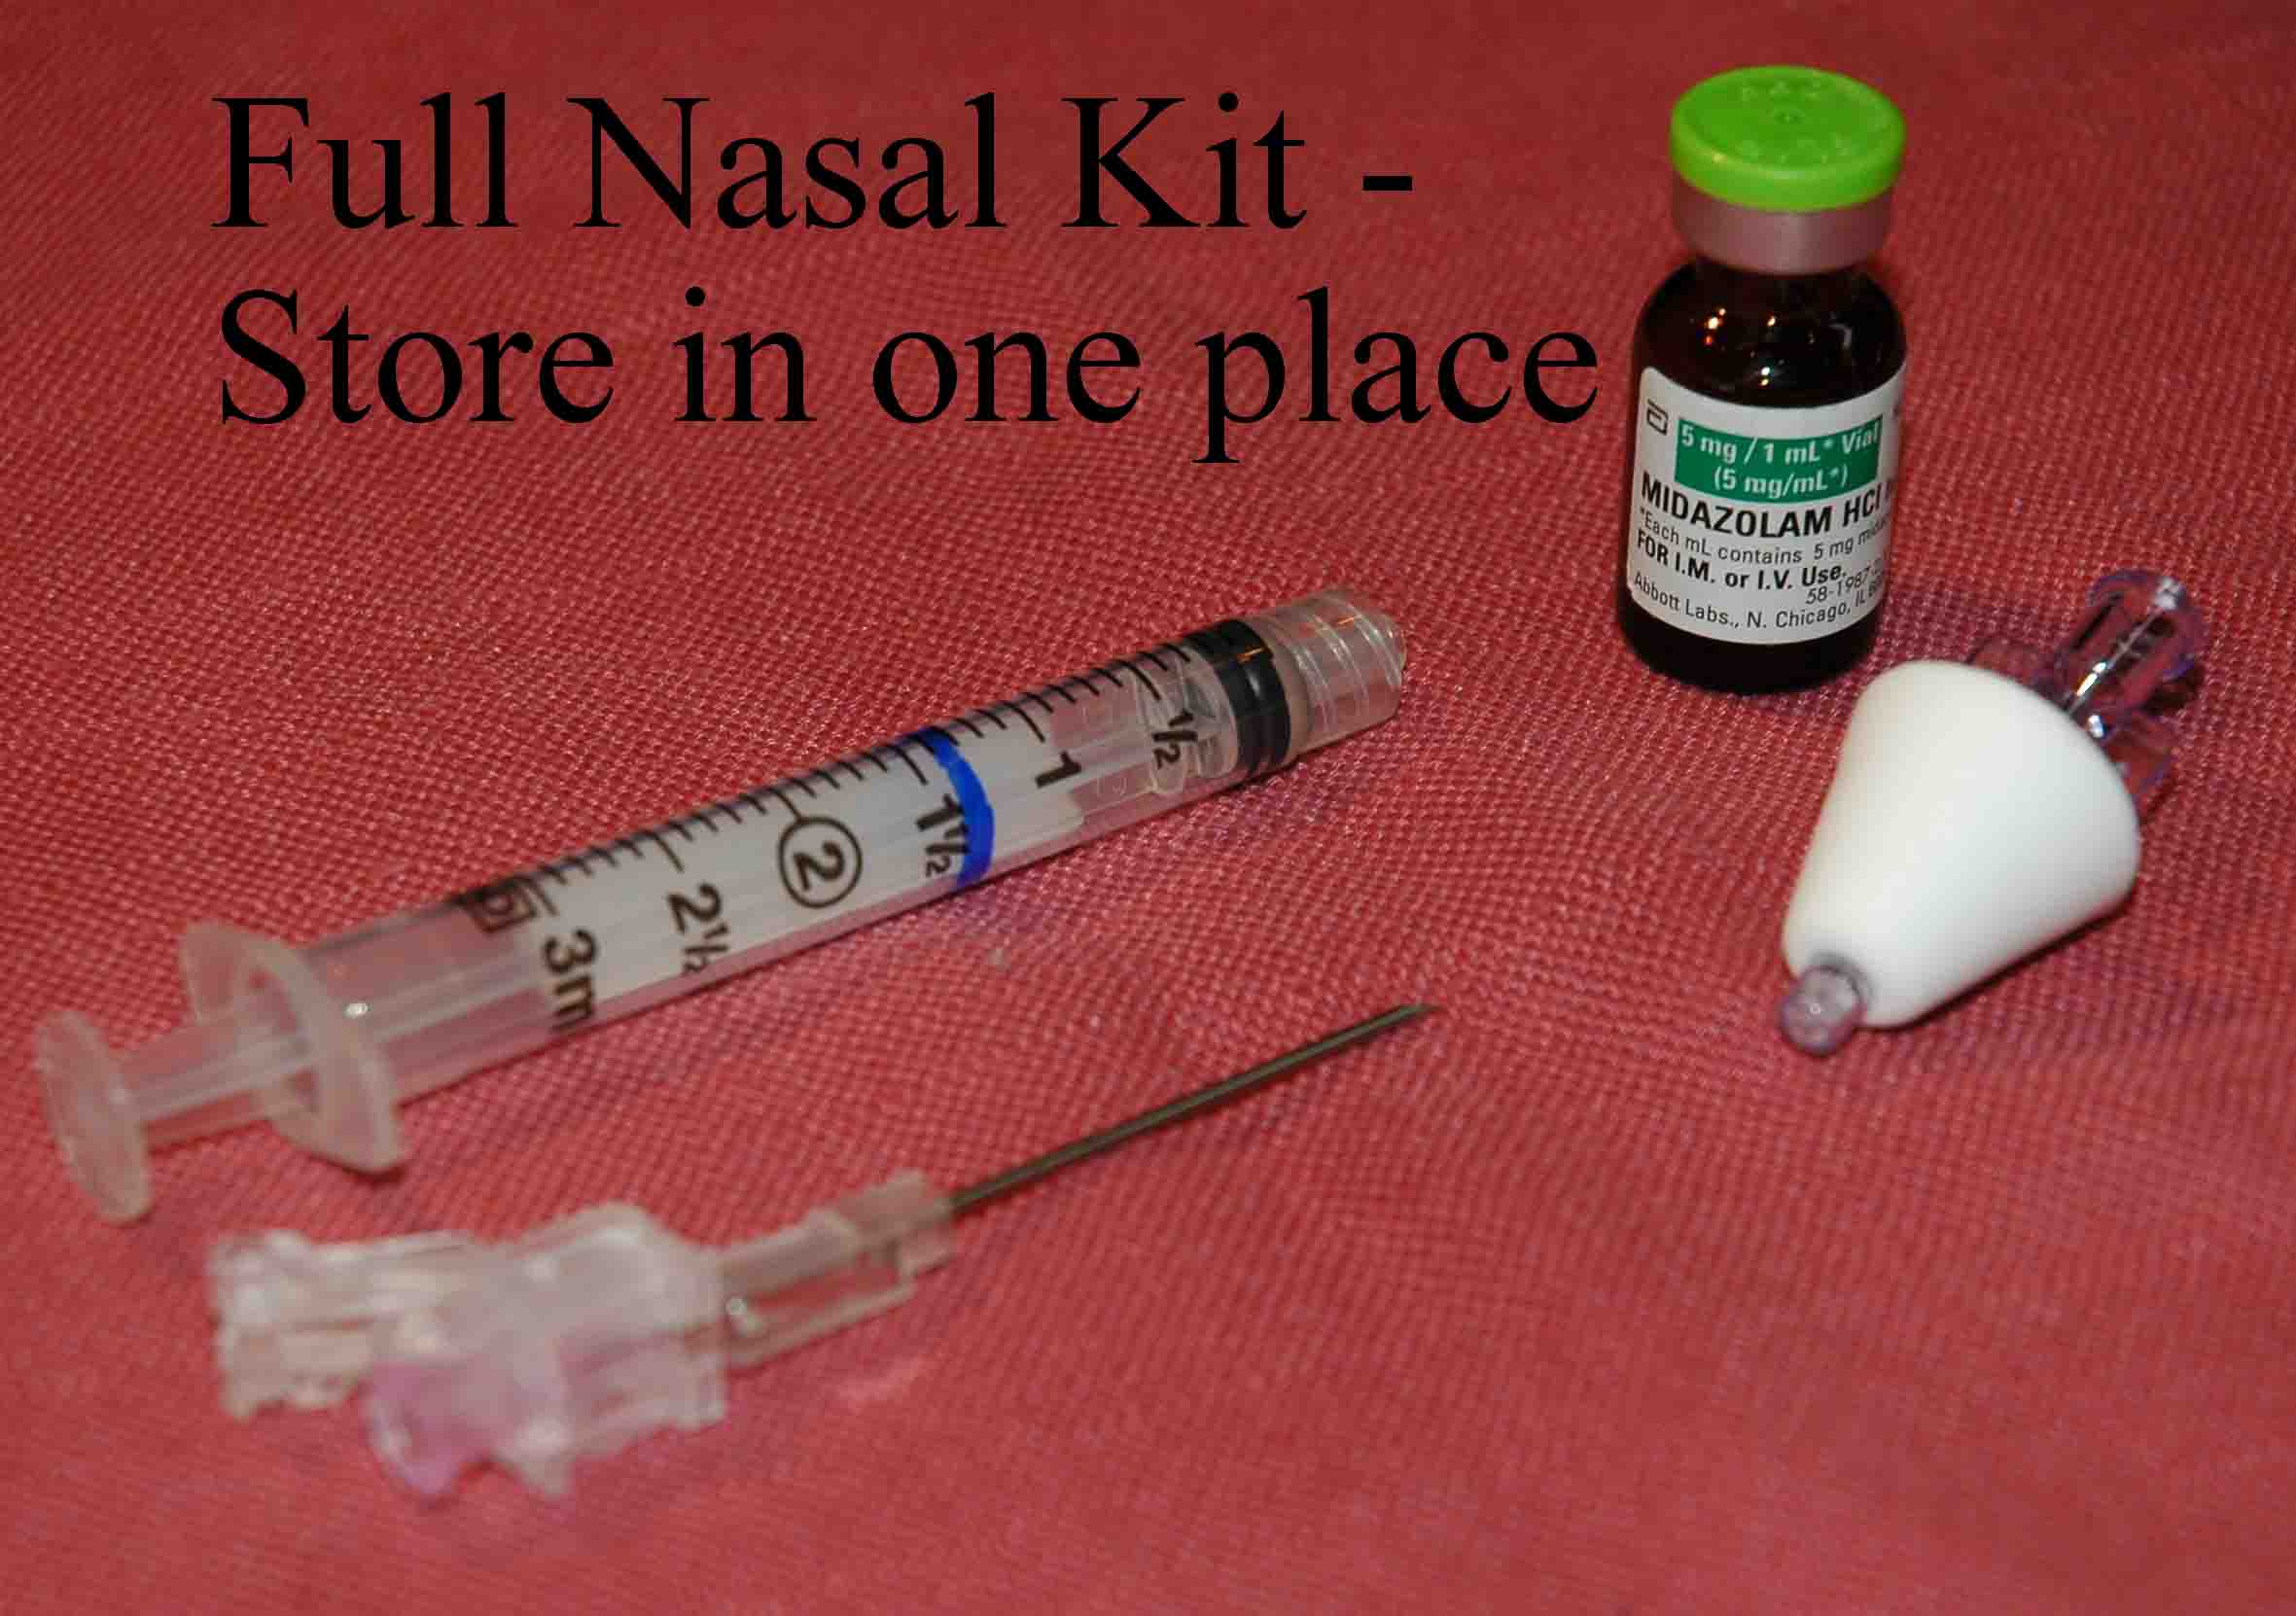 Full kit photo including syringe, atomizer, needle and drug vial should be stored in same place in home